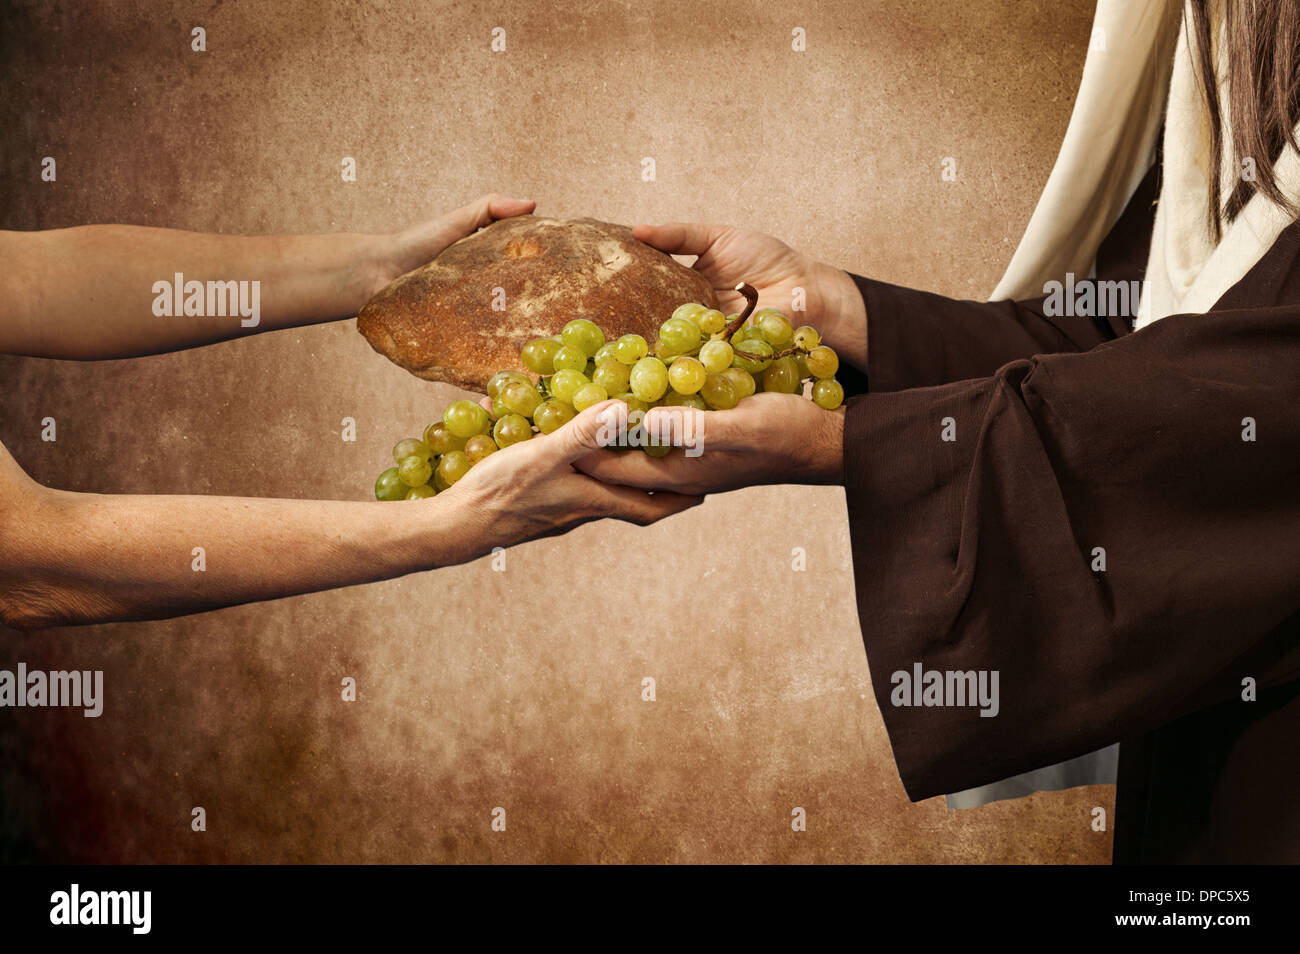 Jesus gives bread and grapes on beige background Stock Photo